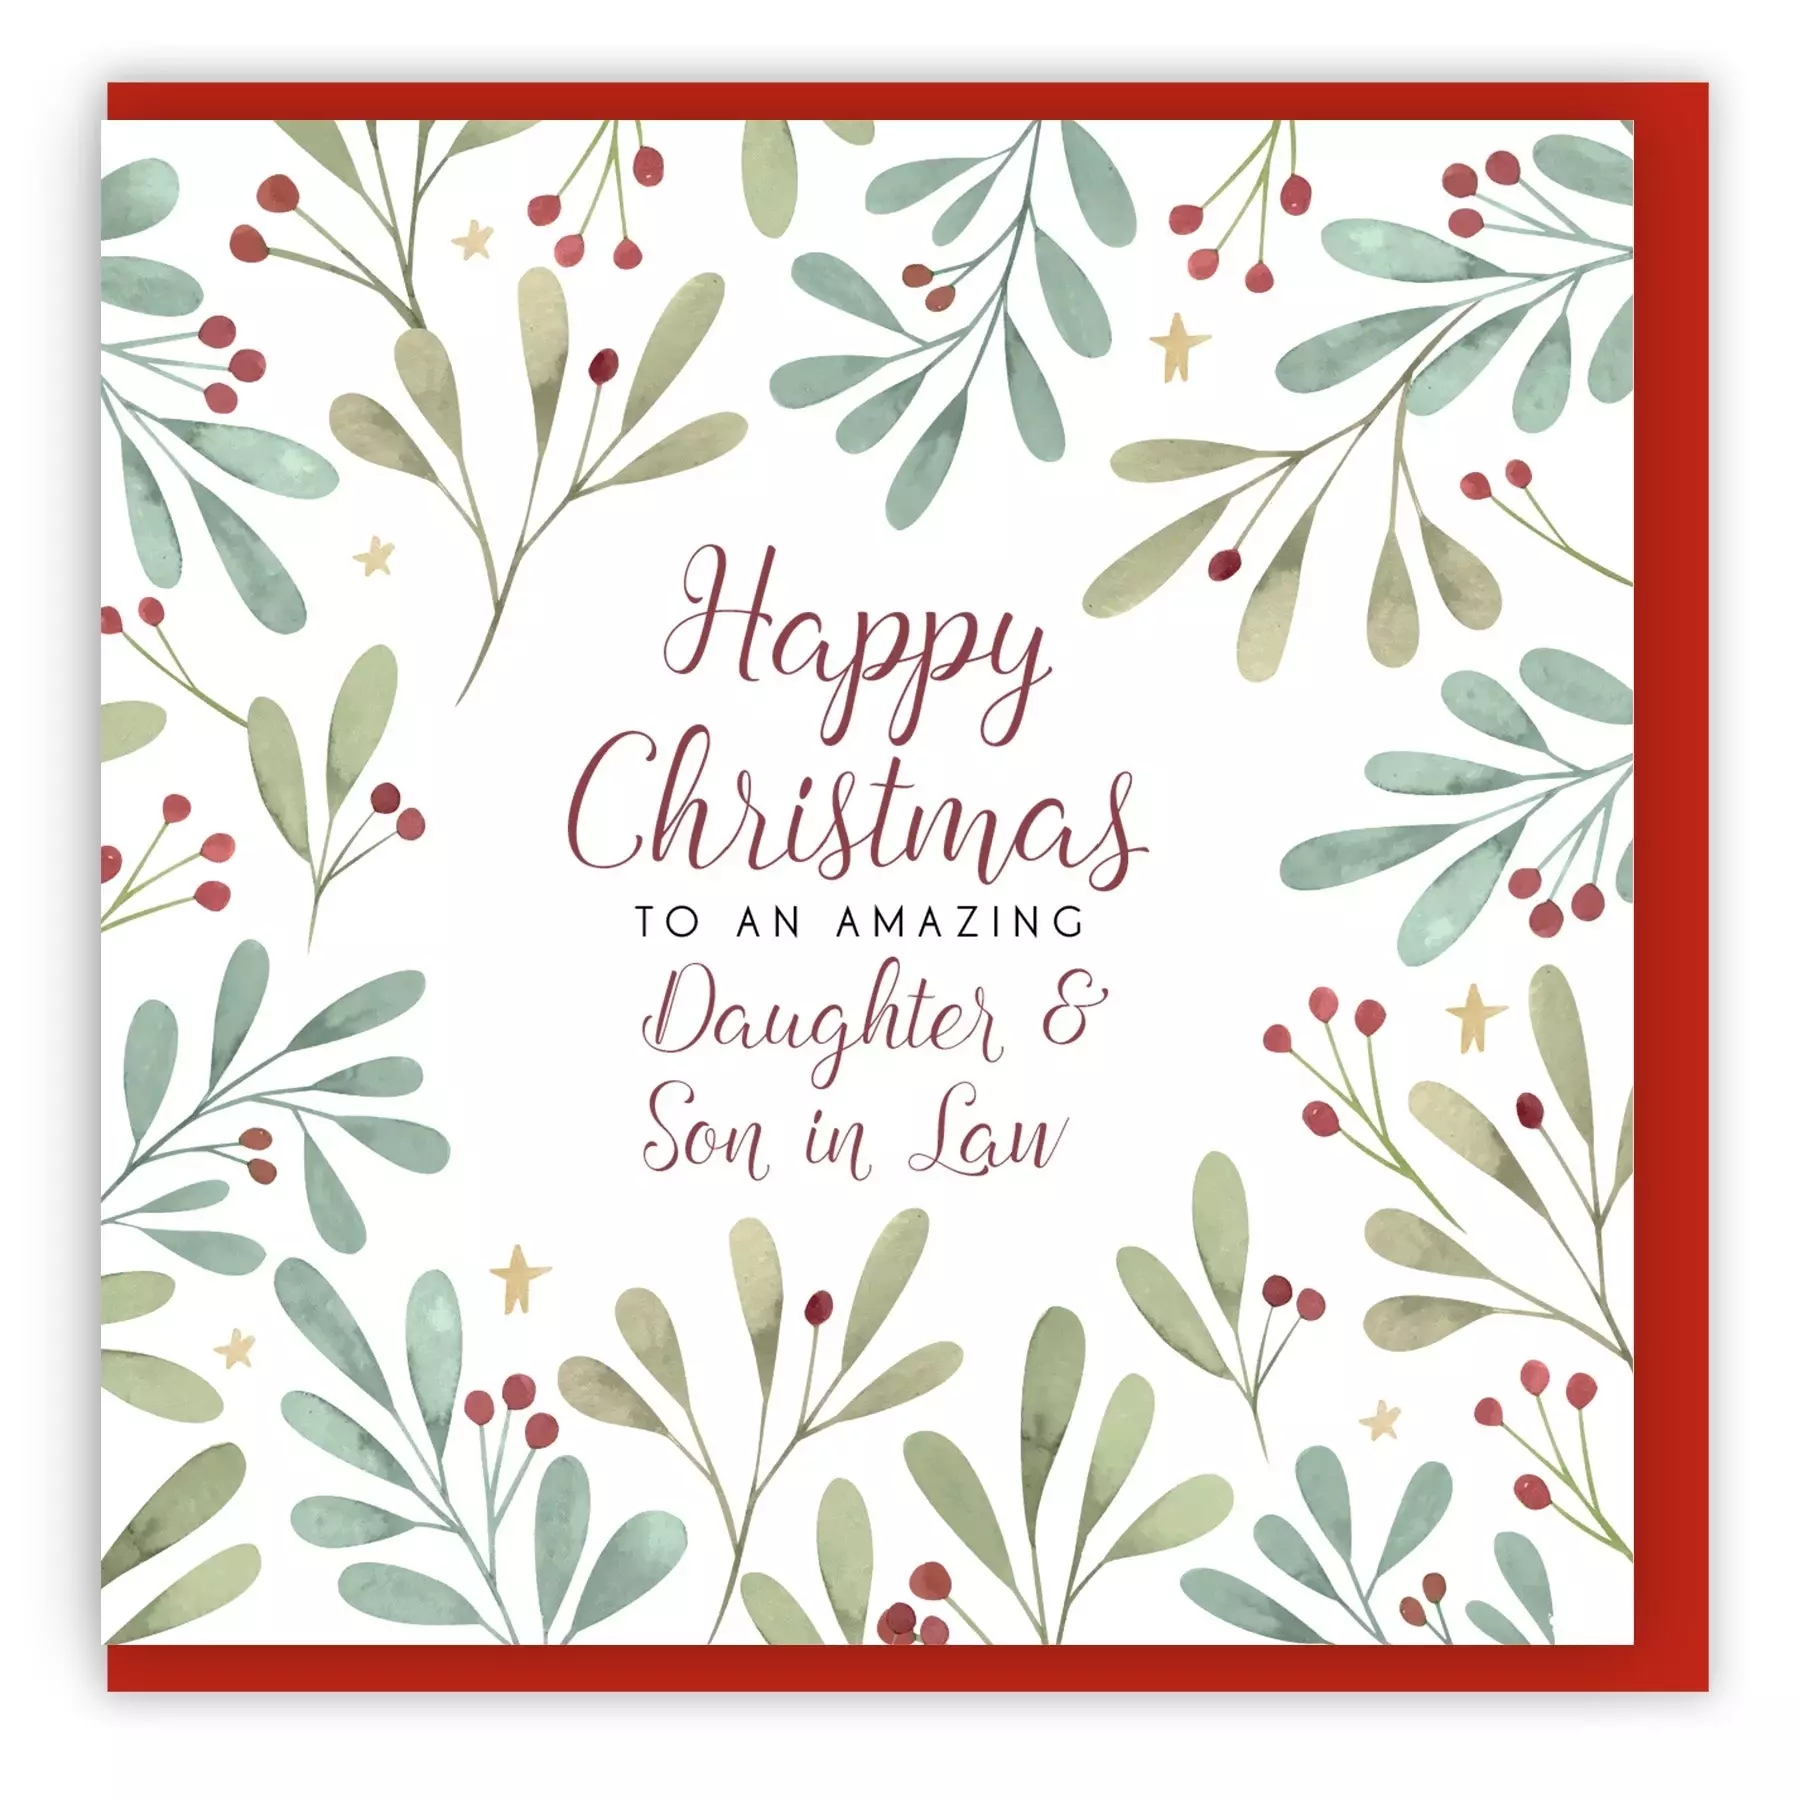 Happy Christmas Daughter and Son in Law Single Christmas Card